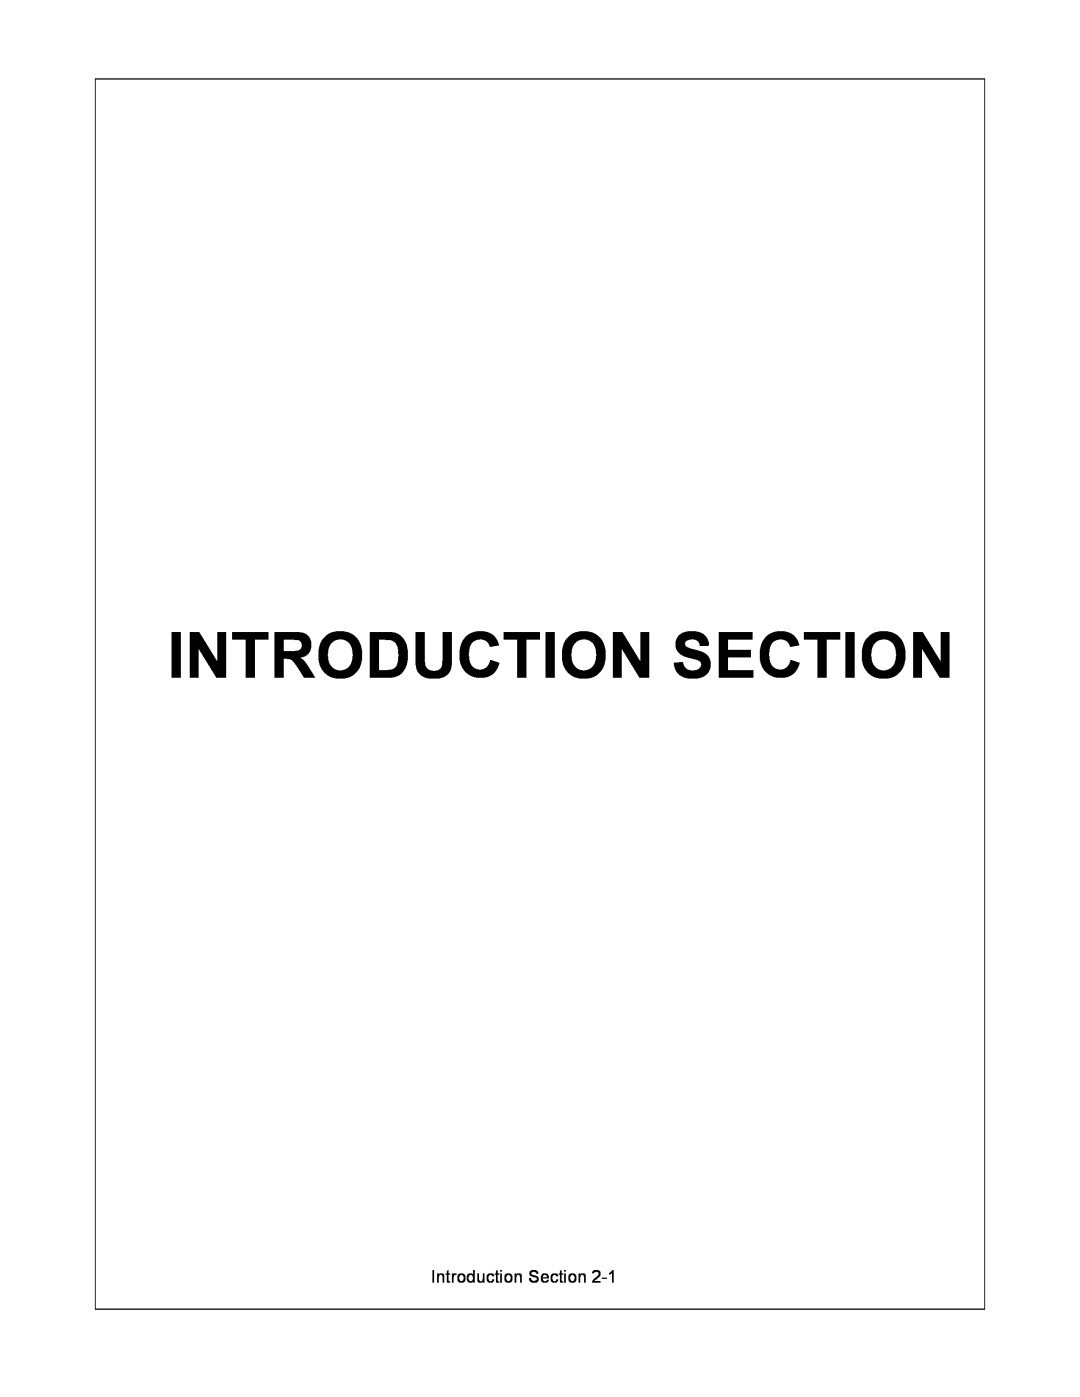 Rhino Mounts 1594 manual Introduction Section 